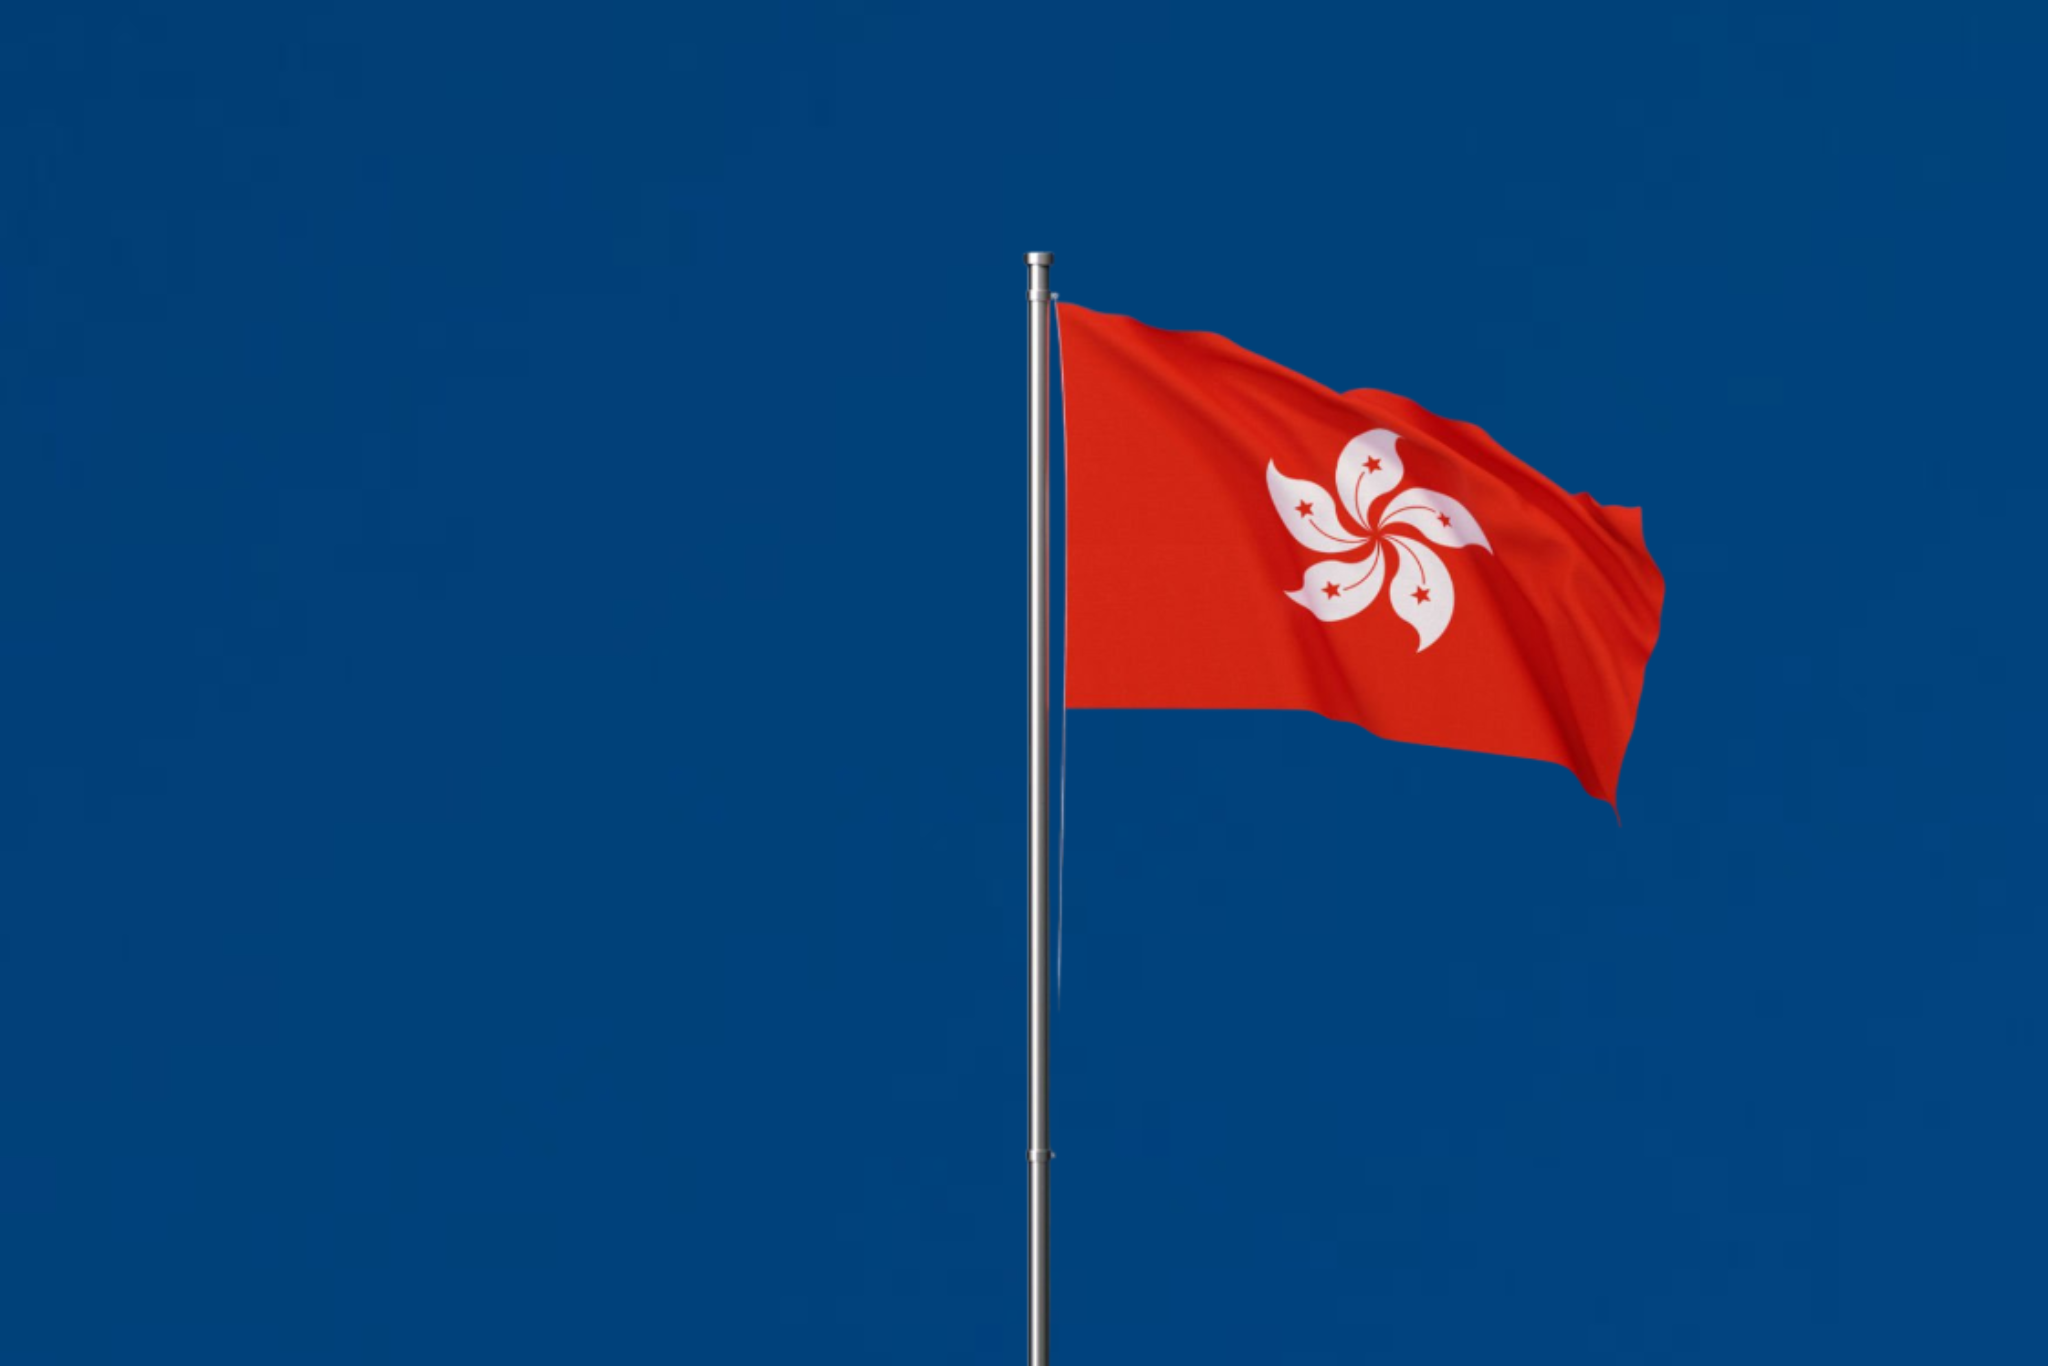 Financial authorities in Hong Kong set to unveil new rules for stablecoin issuers, including licensing and retail sales restrictions.